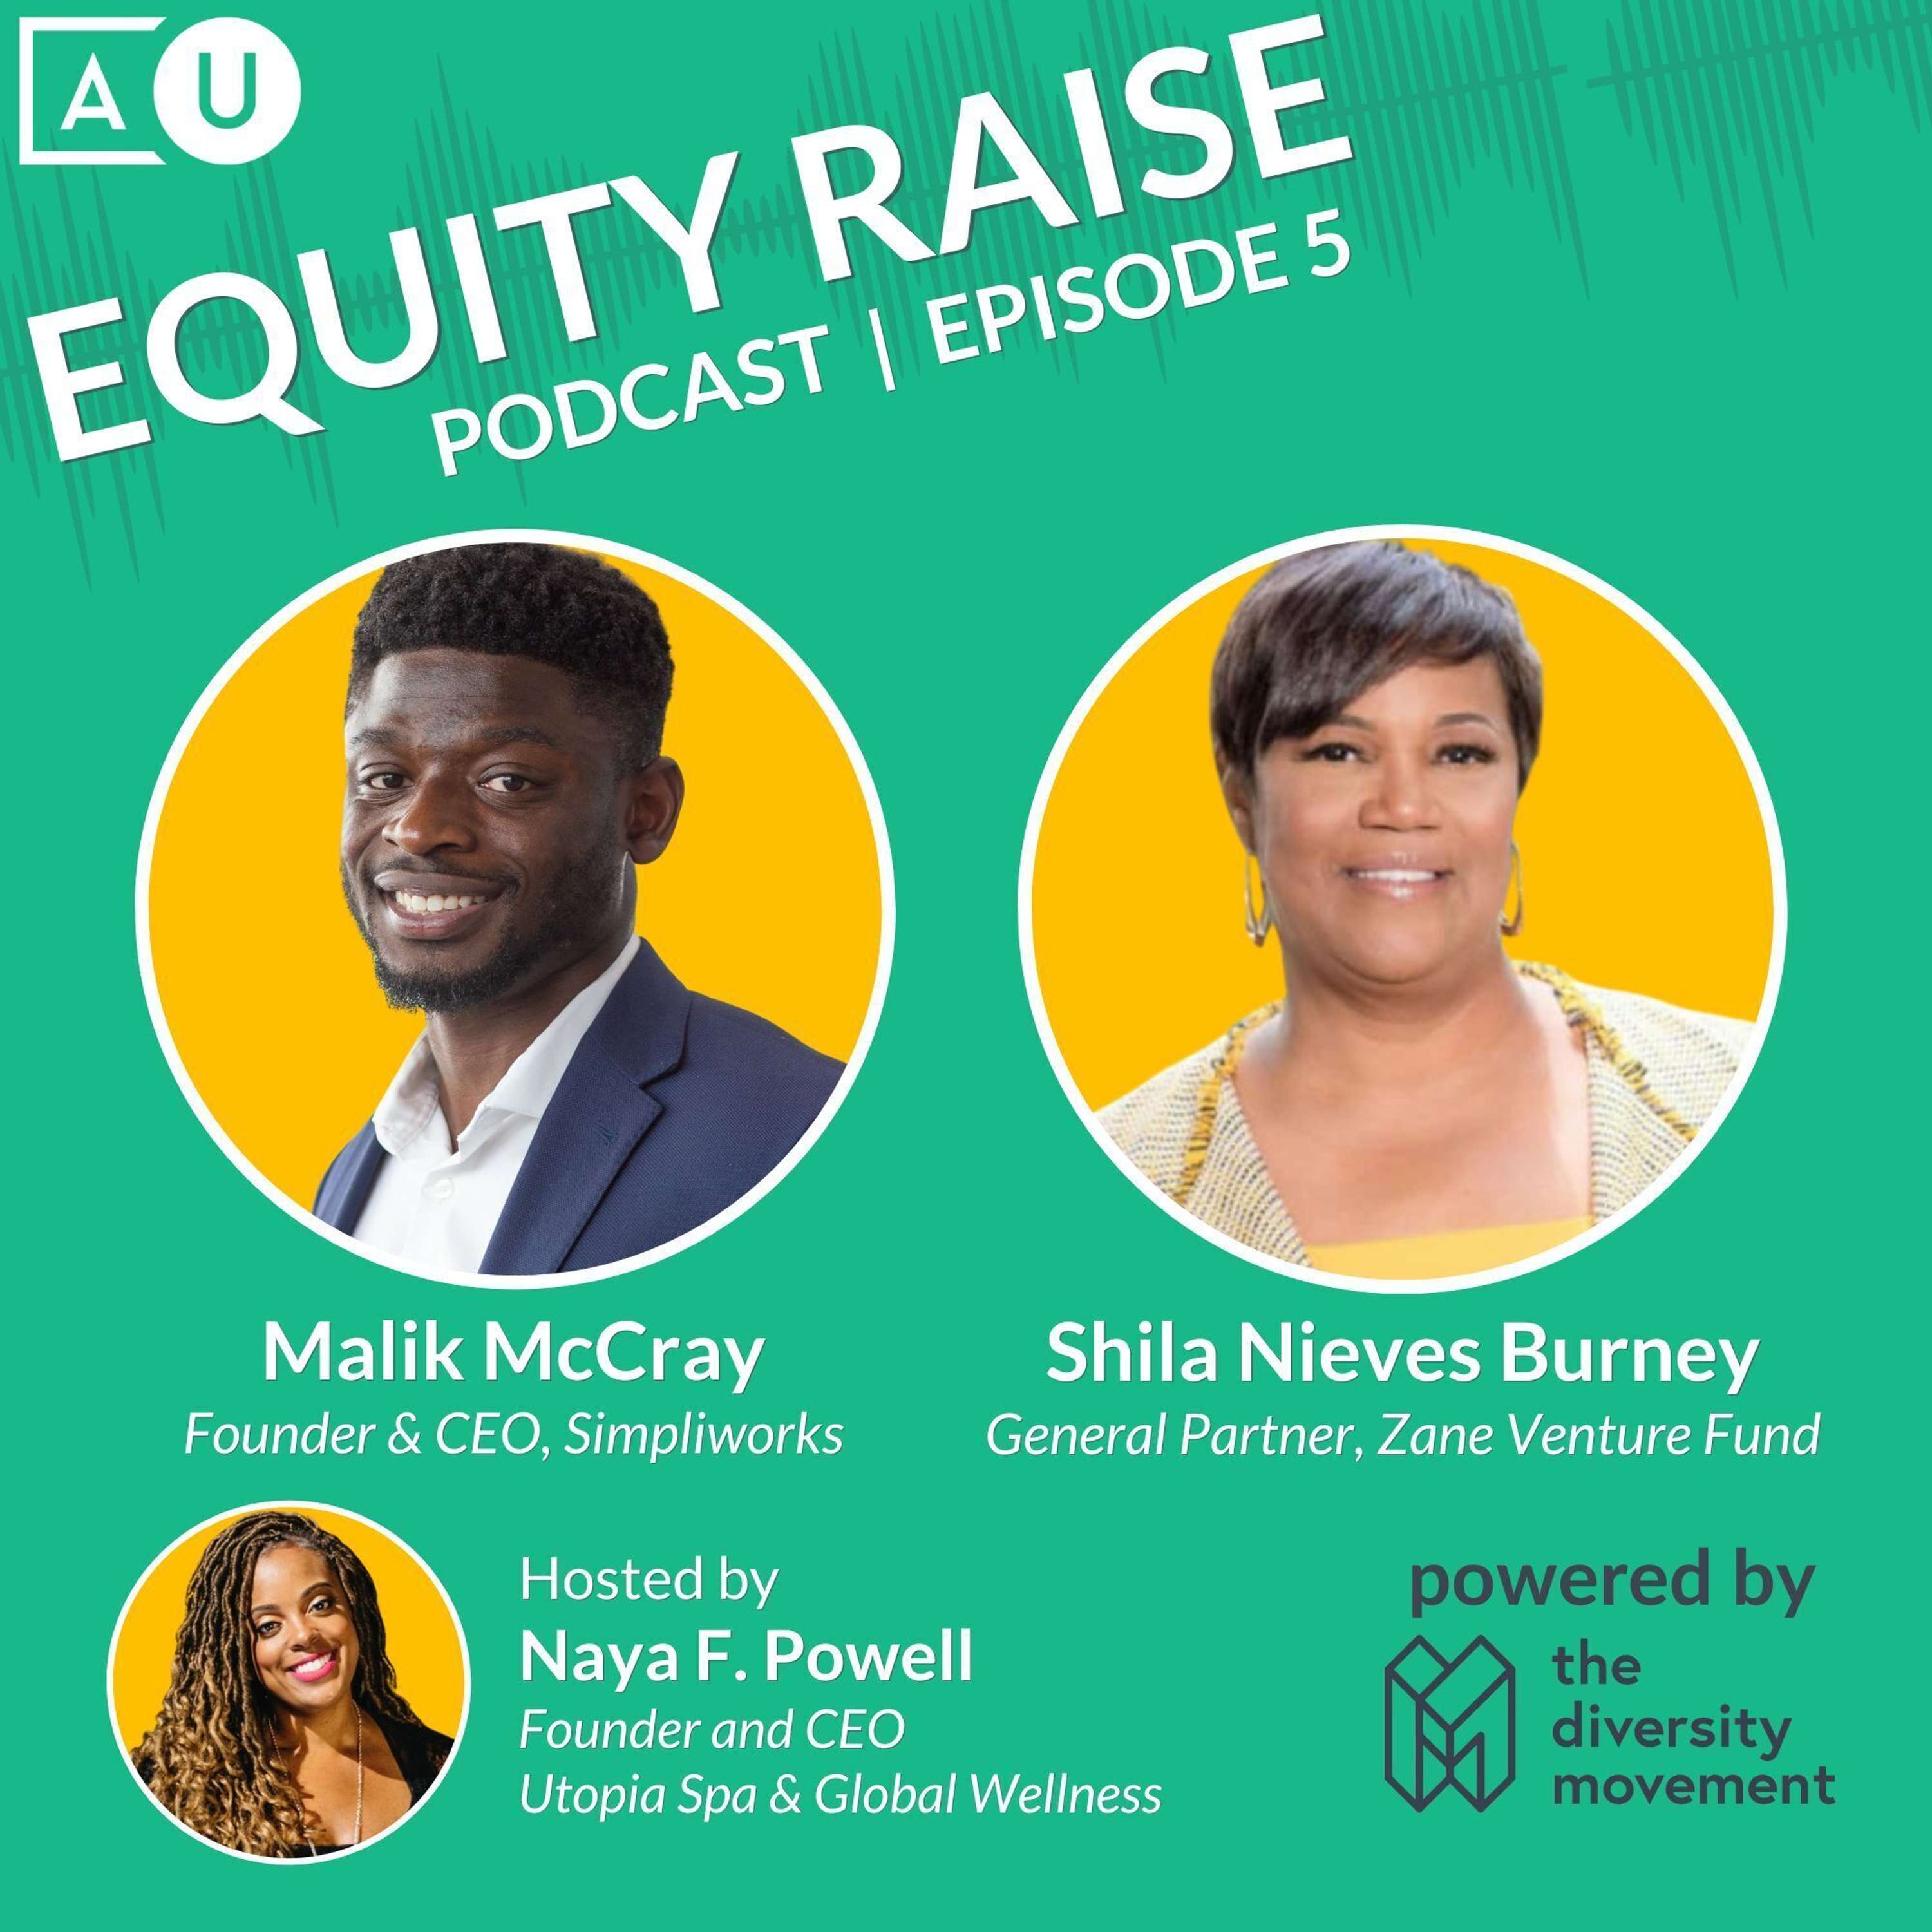 From $1.42 in the Bank to a $700K+ Raise, with Malik McCray (Simpliworks) and Shila Nieves Burney (Zane Venture Fund)